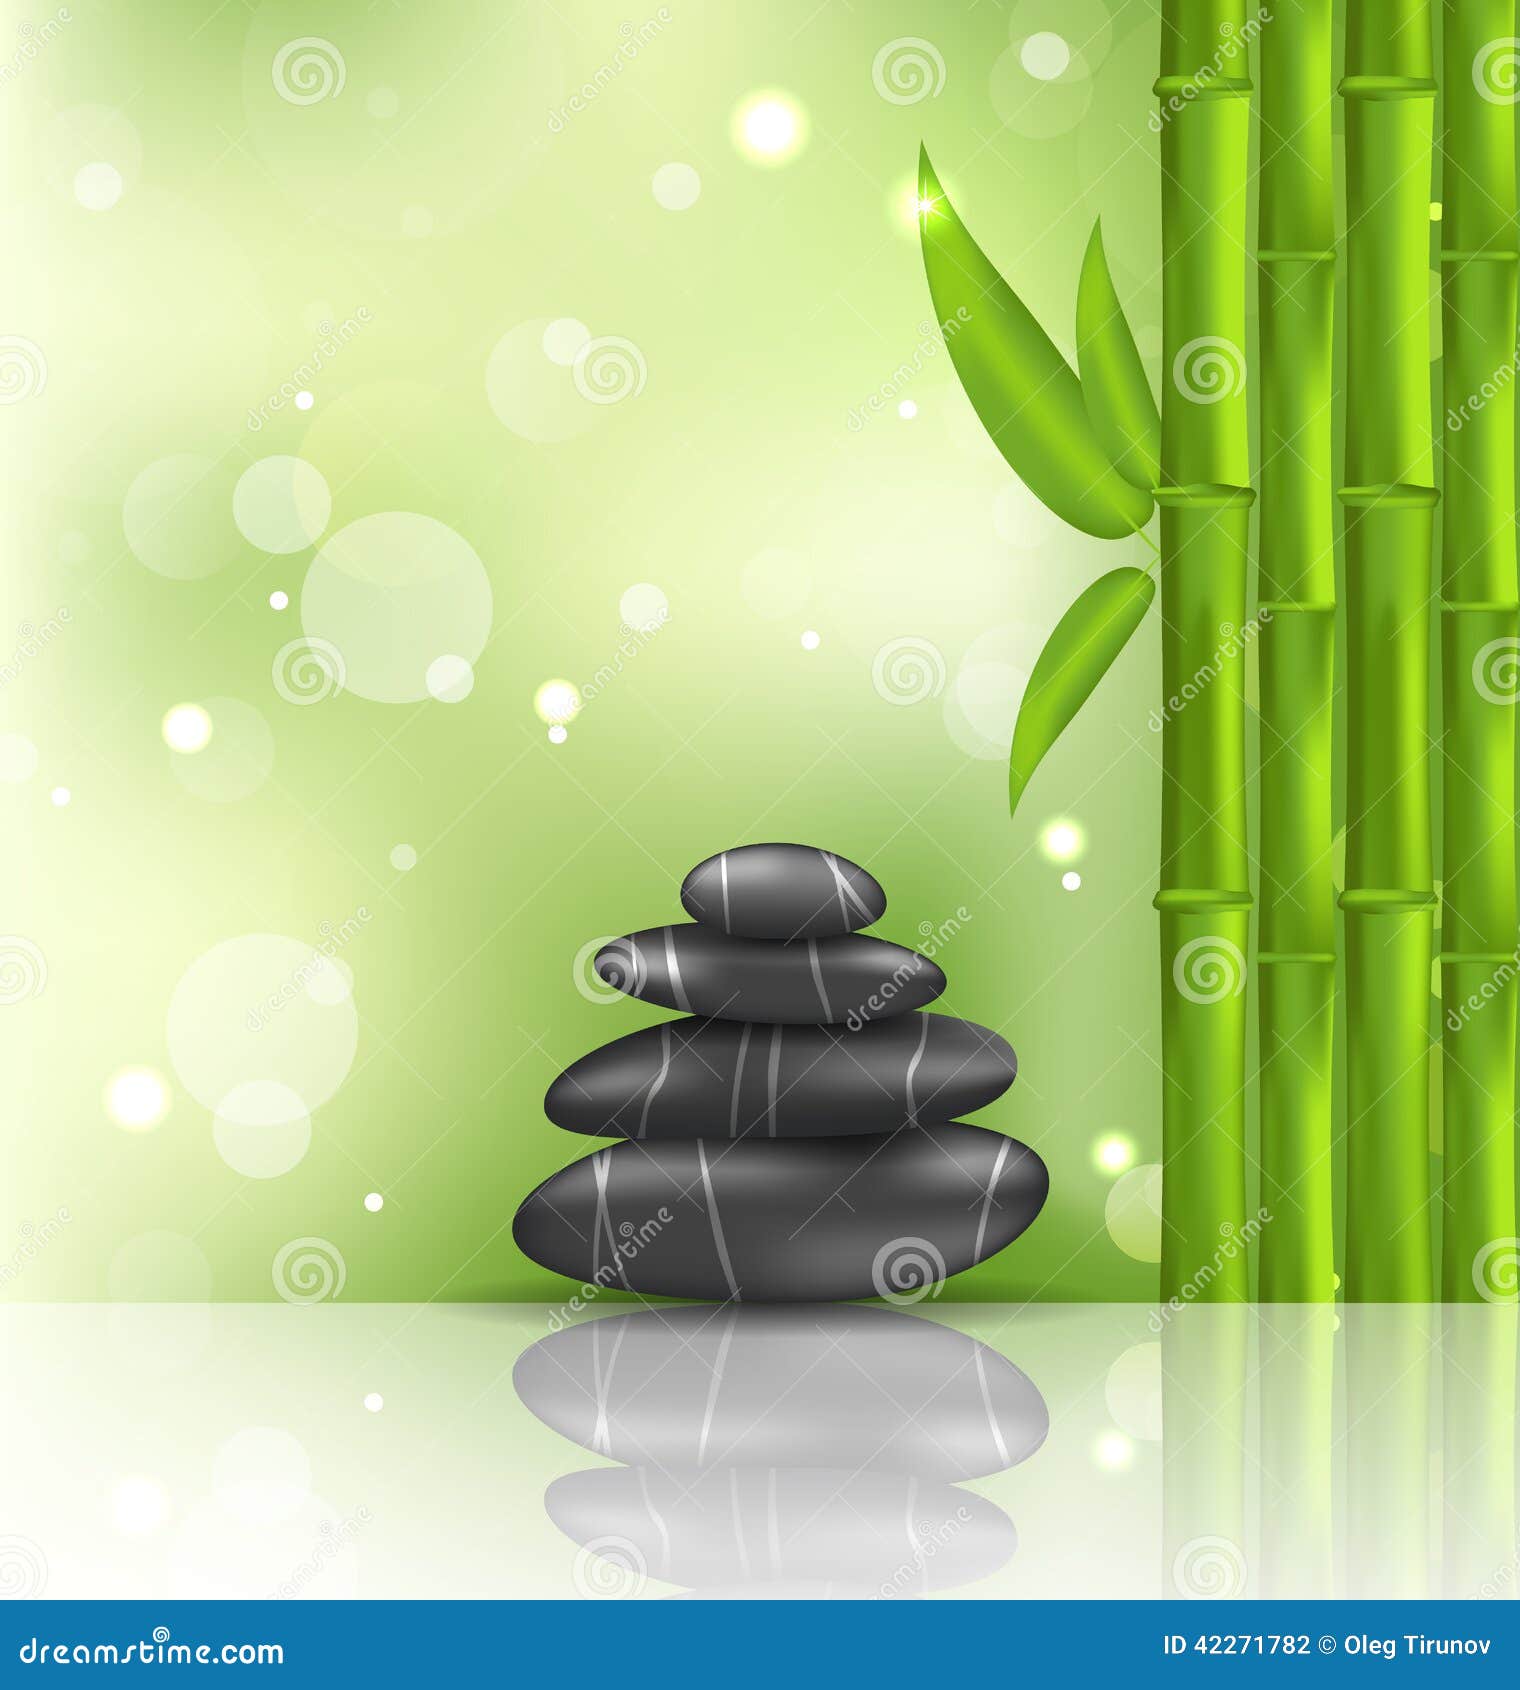 meditative oriental background with bamboo and hea